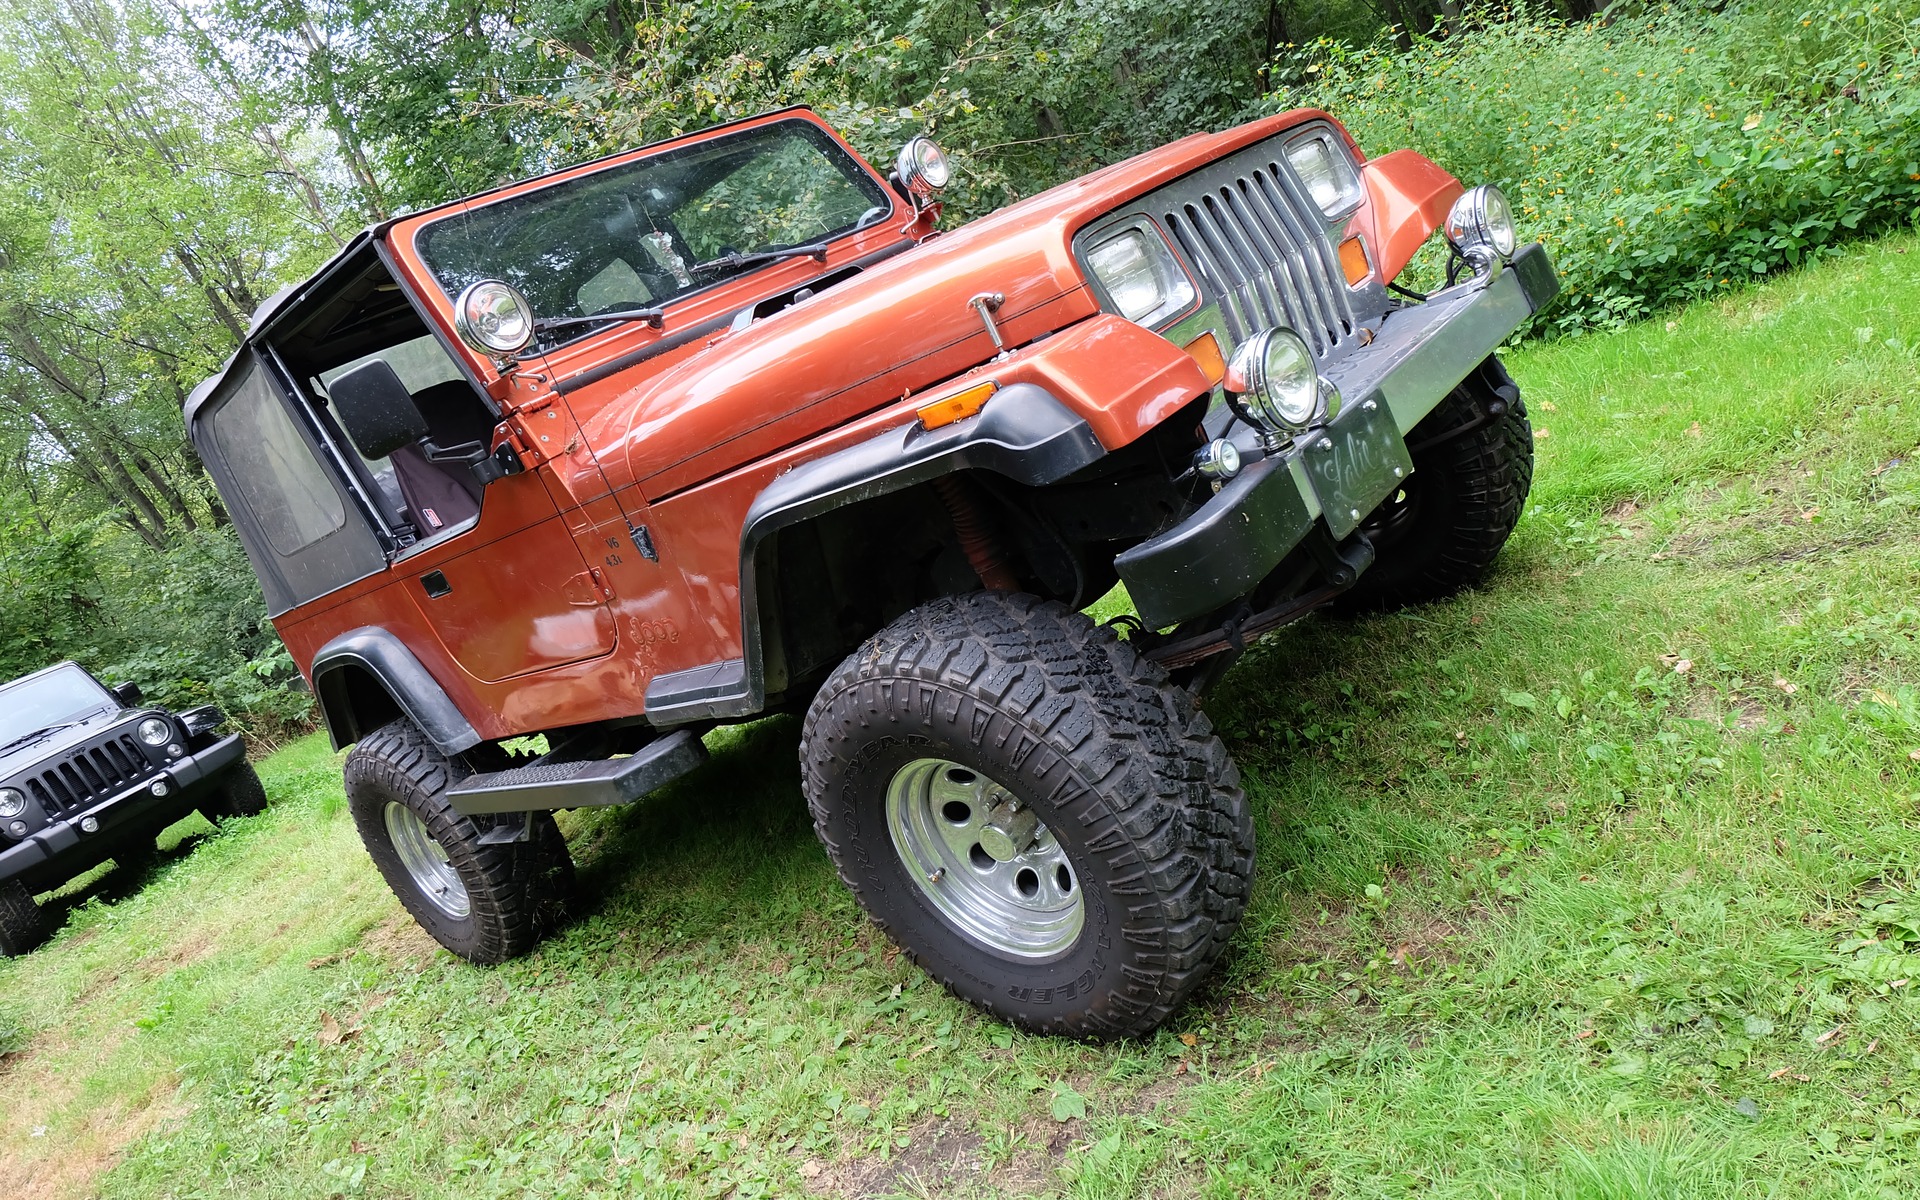 This YJ is 6 inches higher than it was when it left the factory.